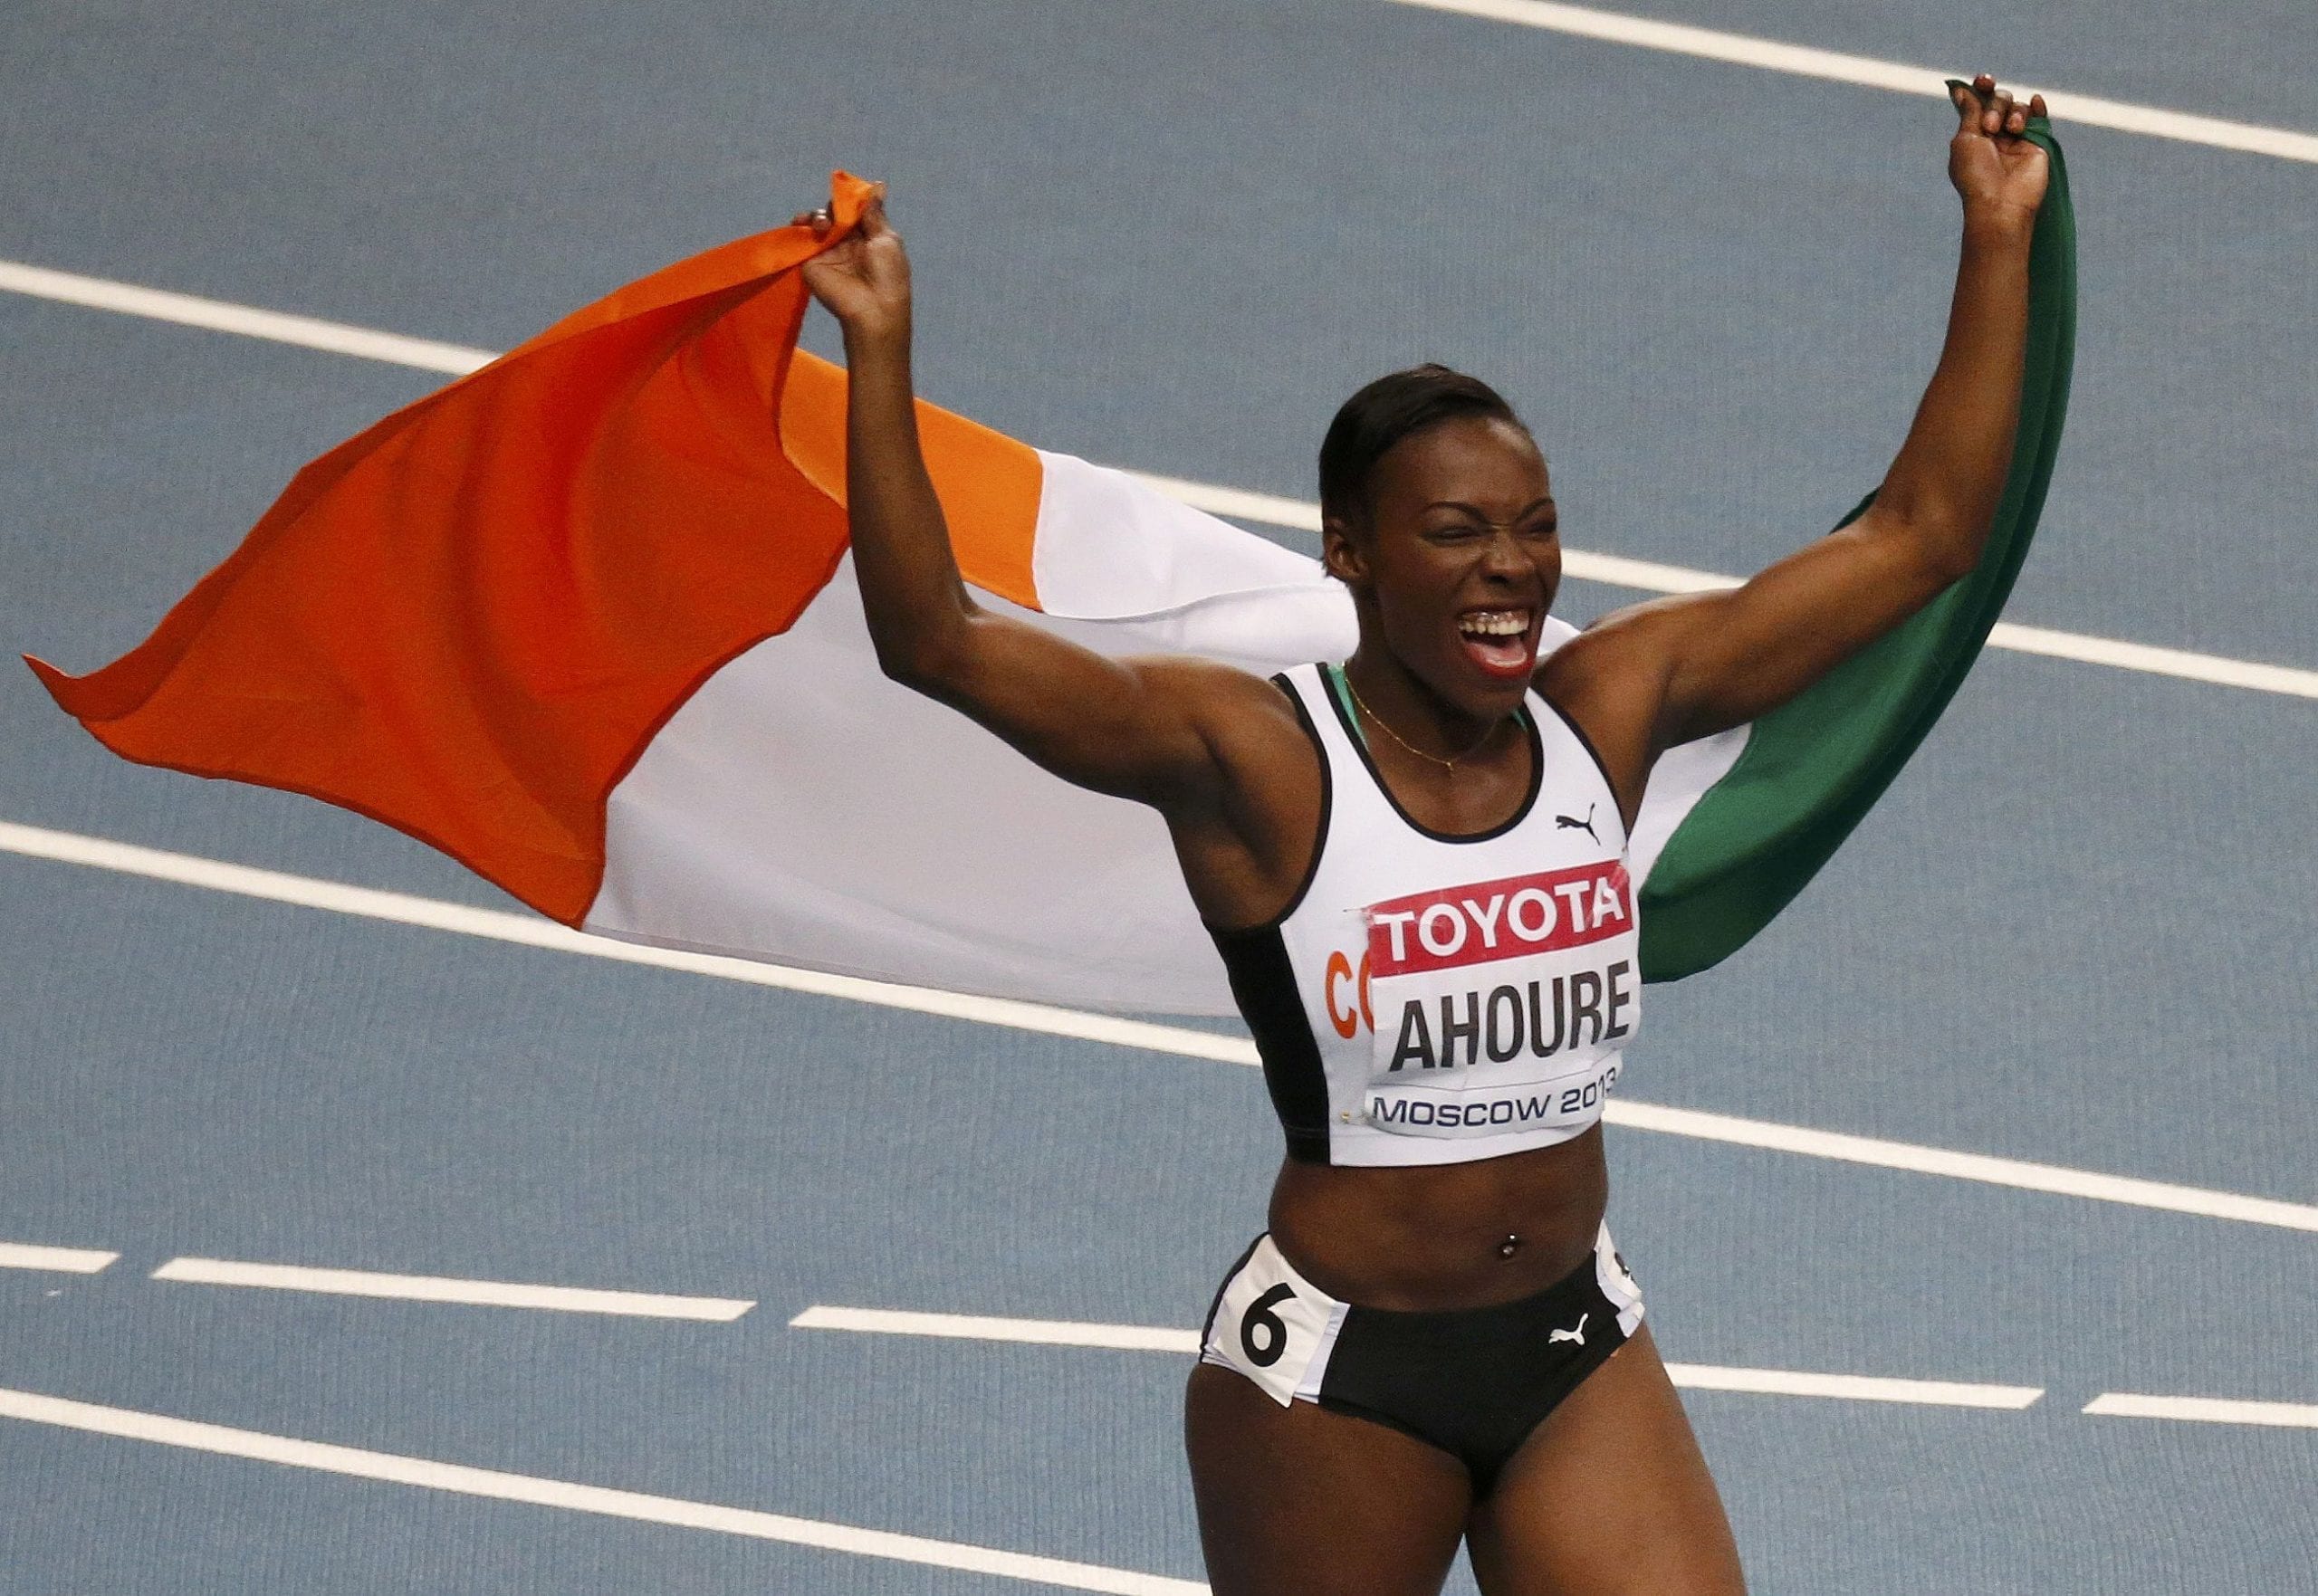 Ahoure of the Ivory Coast celebrates winning second place in the women’s 100 metres final during the IAAF World Athletics Championships at the Luzhniki Stadium in Moscow